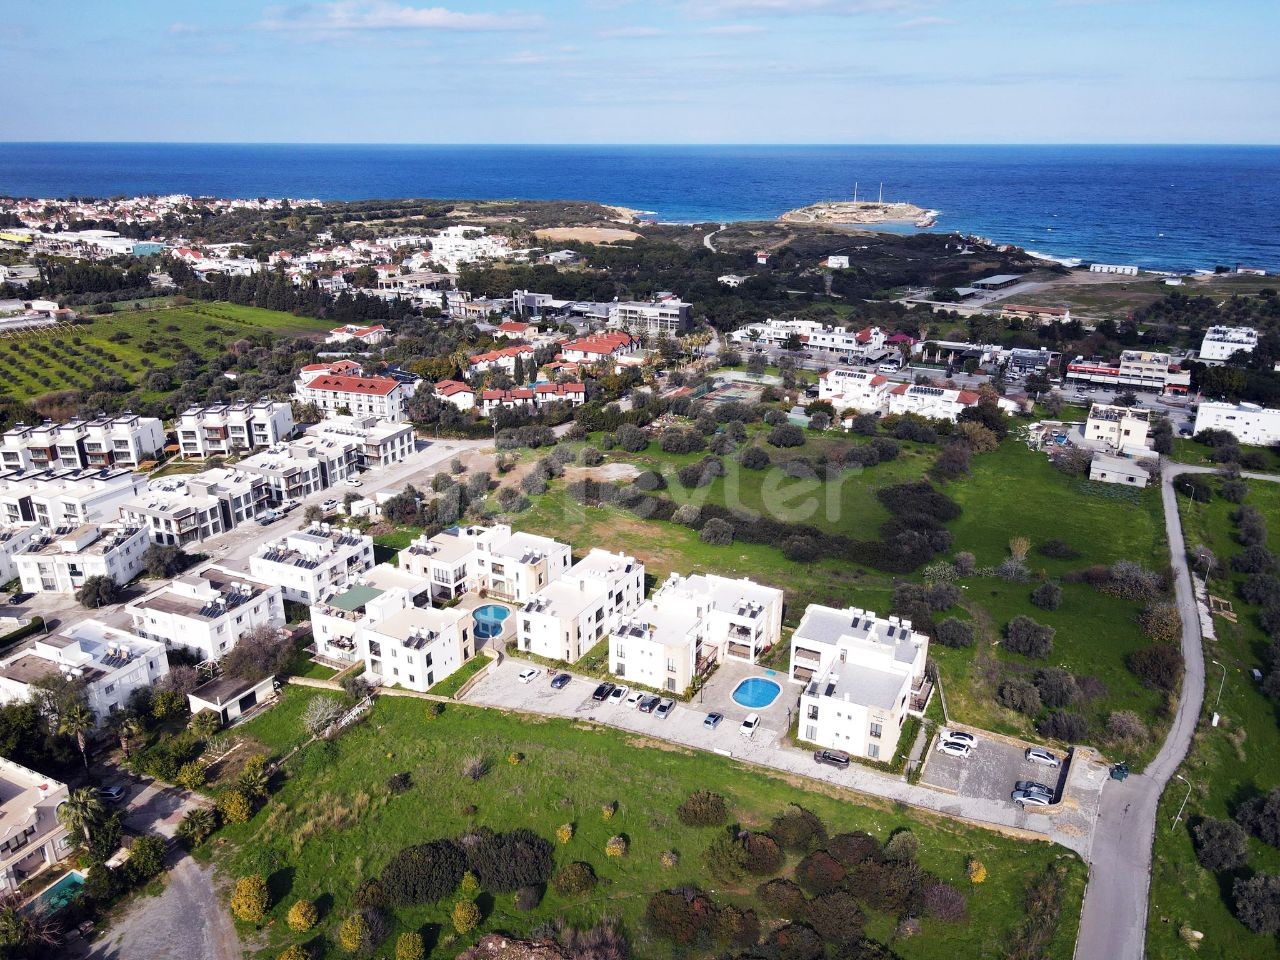 3+1 Flat for Sale with Shared Pool, Fully Furnished, Sea View,  Cyprus, Kyrenia